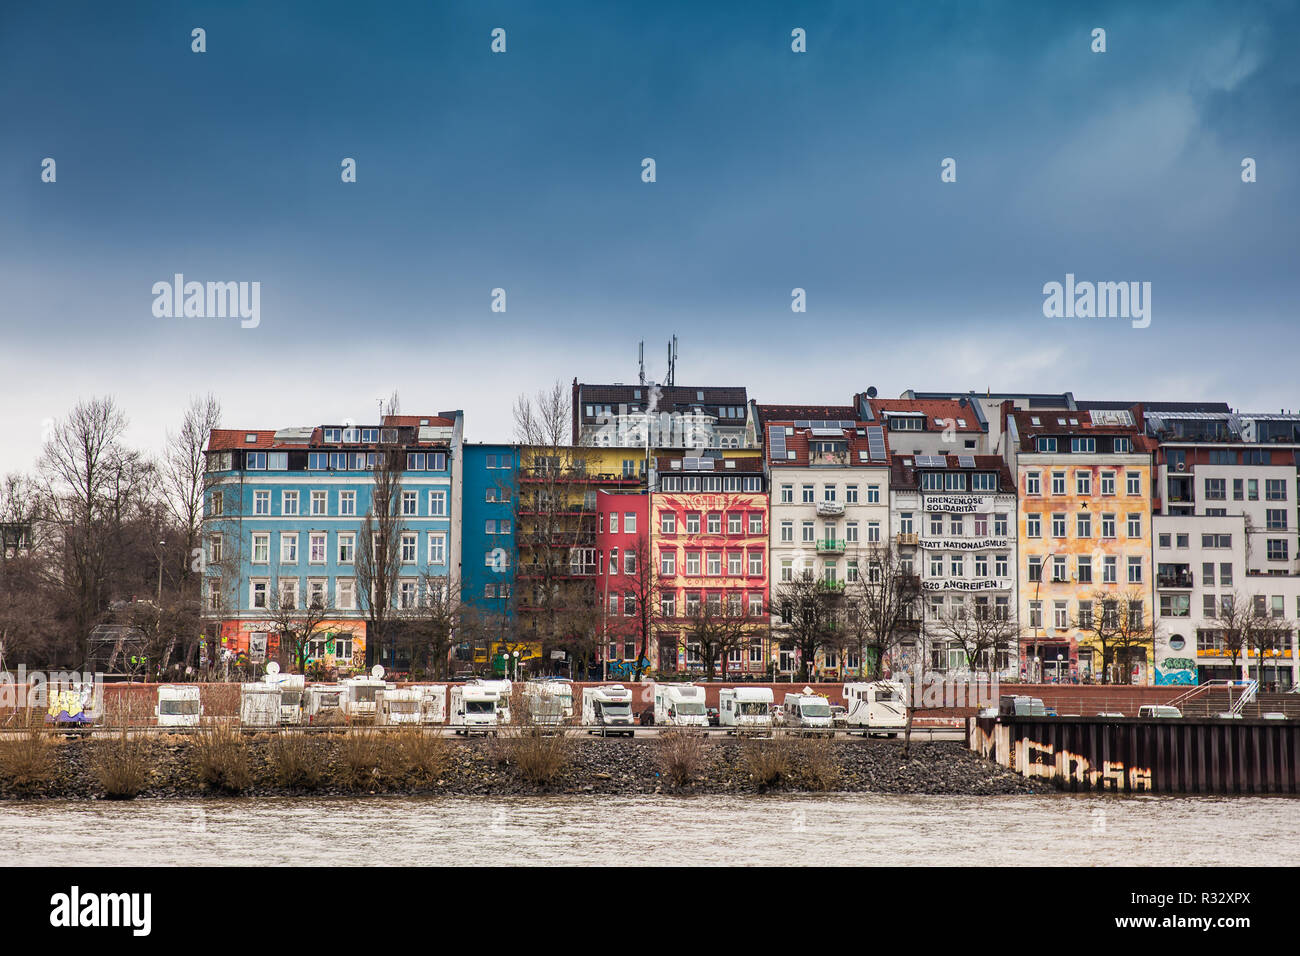 Caravans and buildings on the banks of the Elbe river in Hamburg Stock Photo